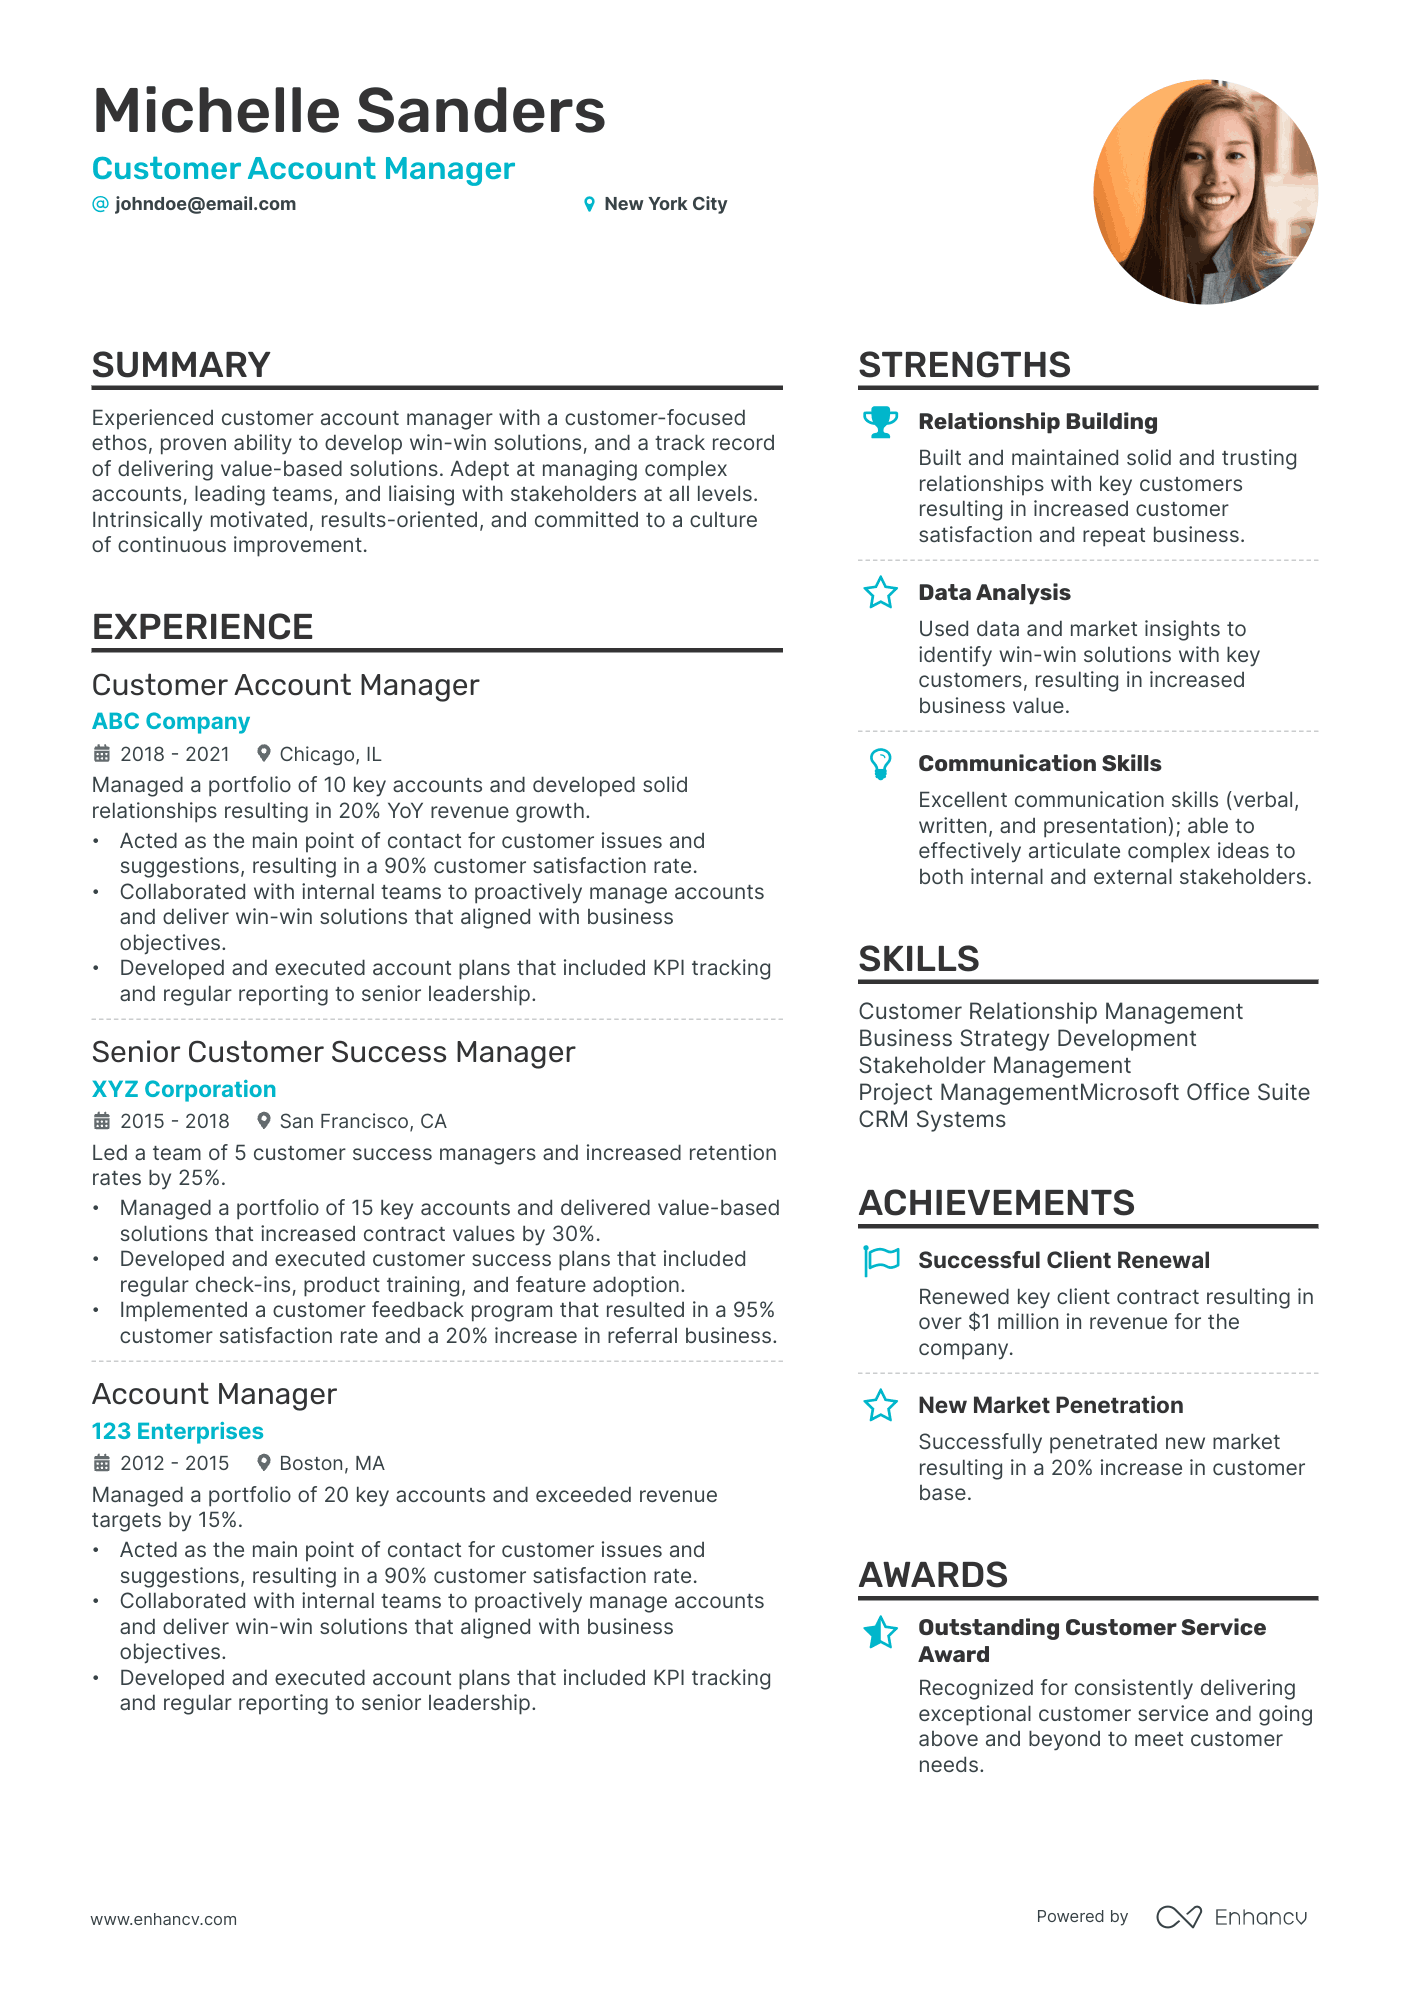 Customer Account Manager resume example